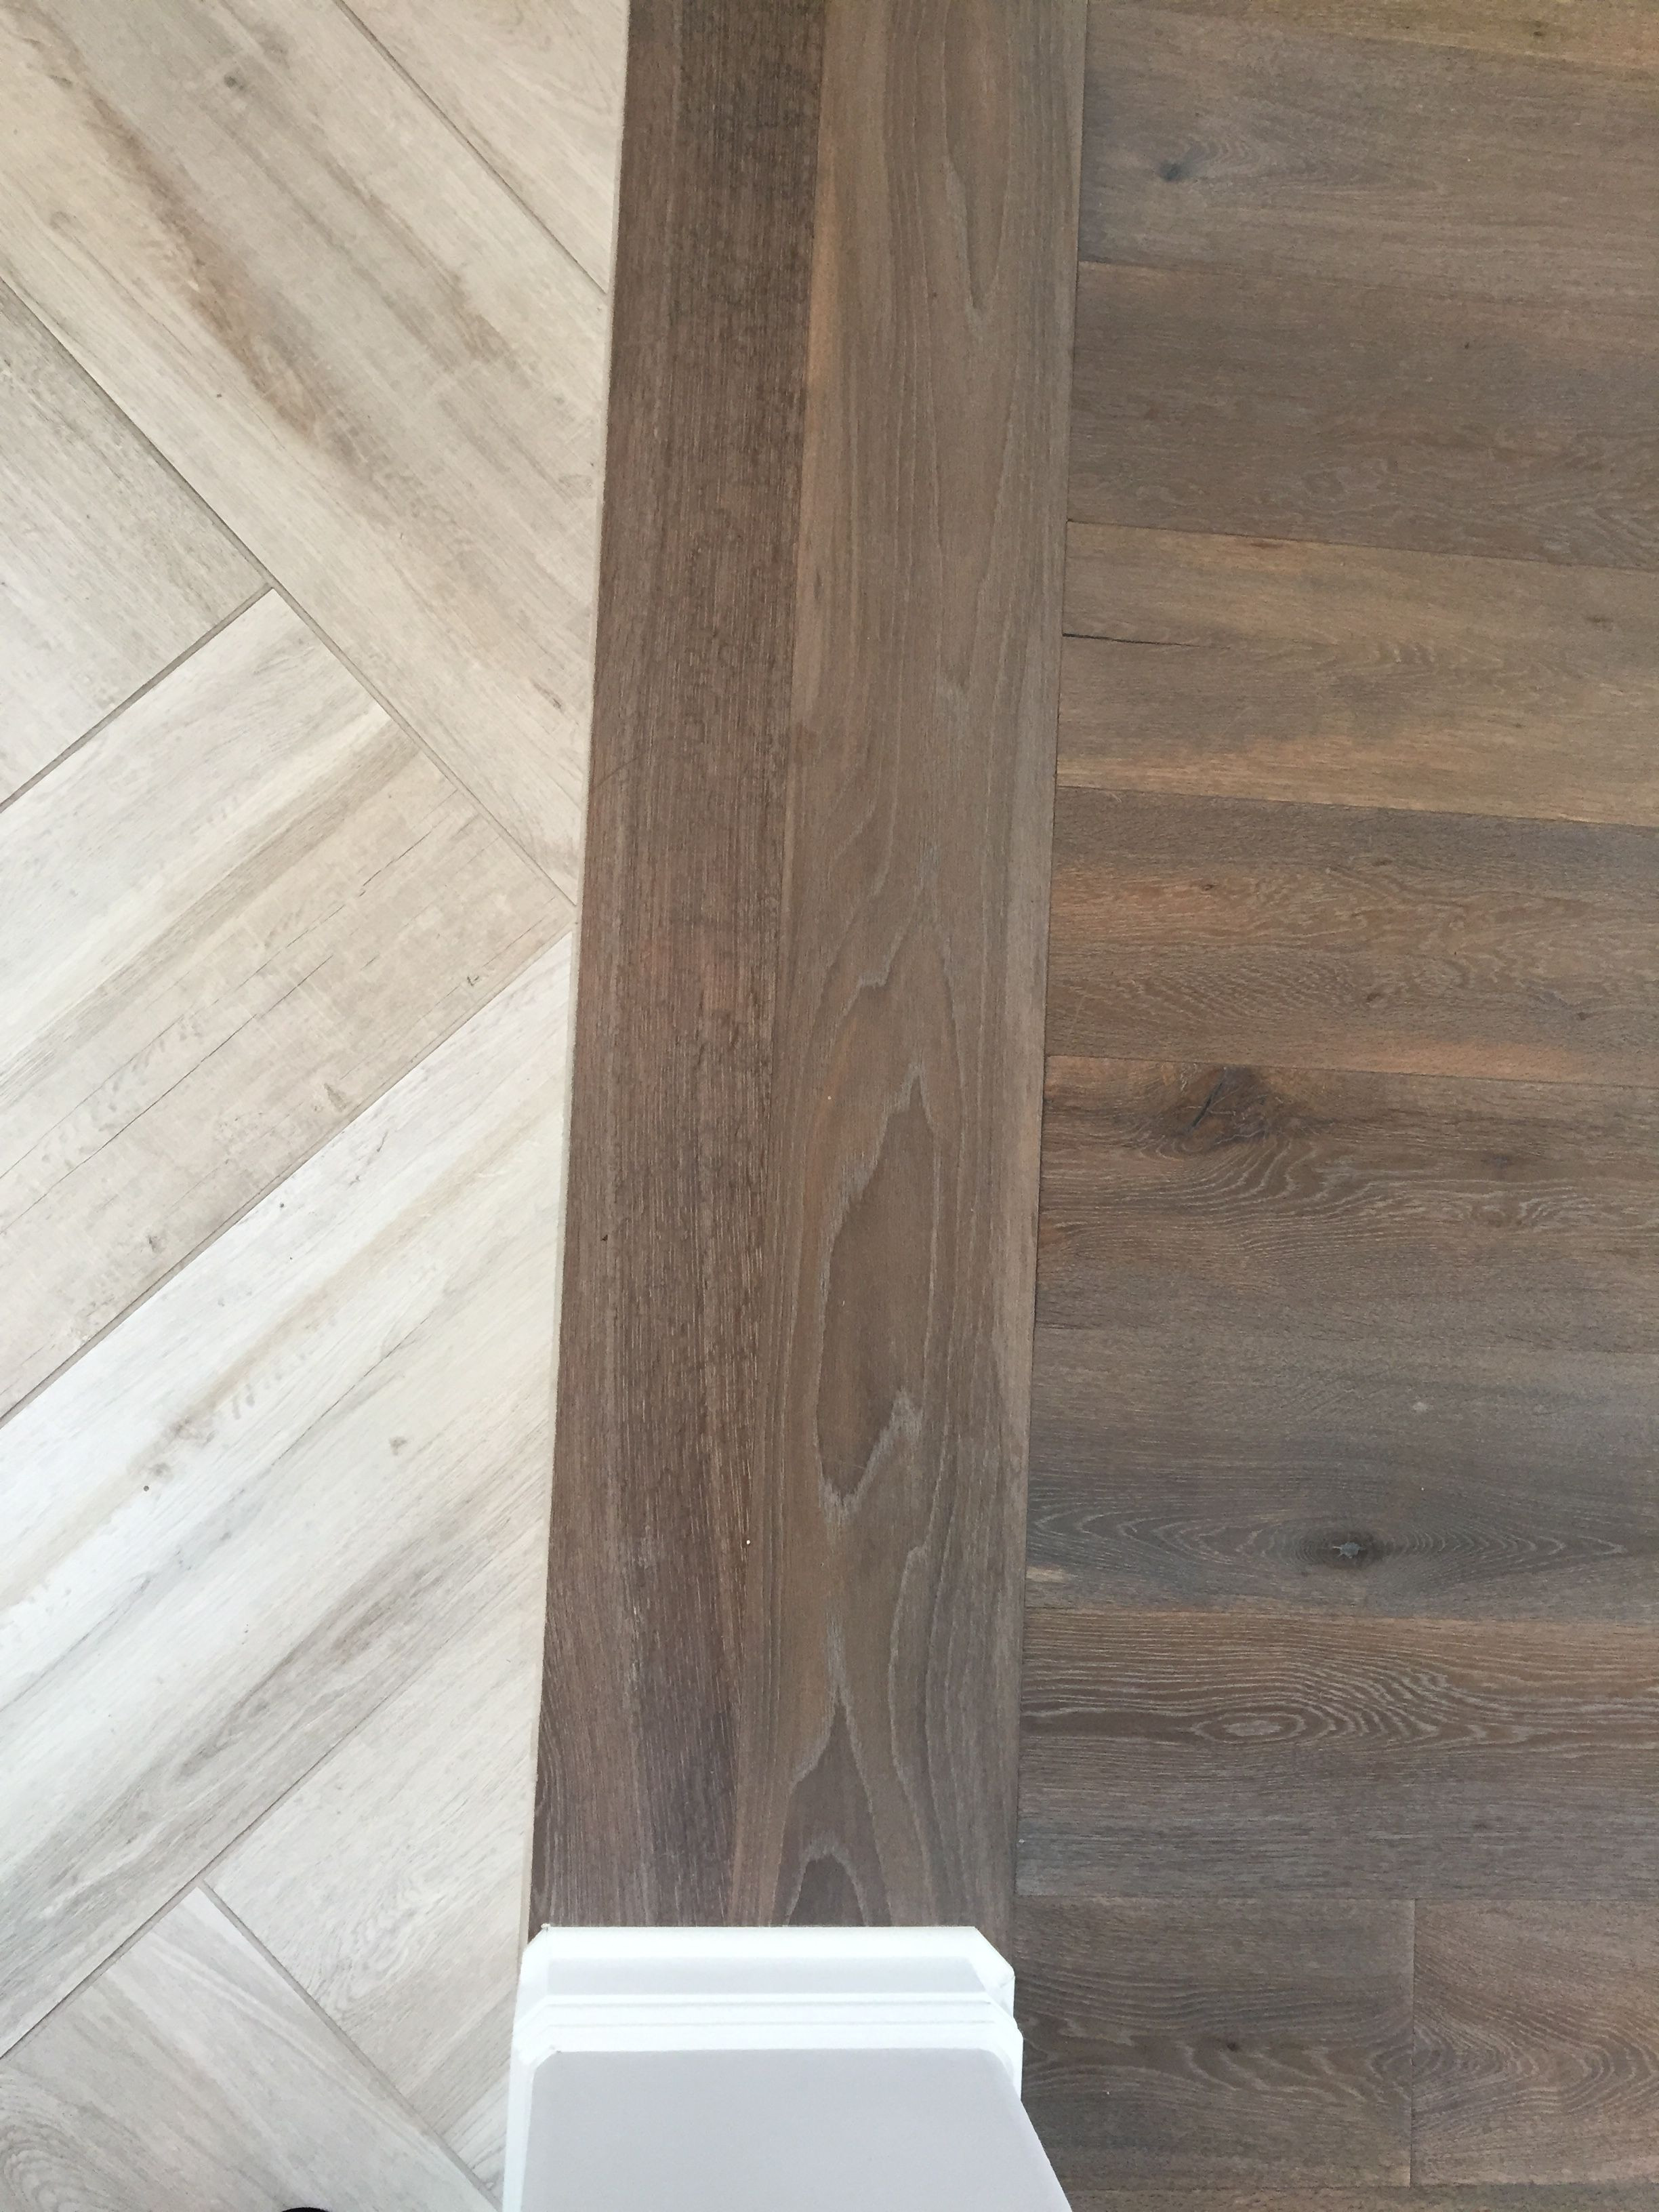 10 Awesome How to Transition Hardwood Floor to Tile 2022 free download how to transition hardwood floor to tile of tile to carpet transition strip awesome od floor tile transition for tile to carpet transition strip inspirational floor transition laminate to he